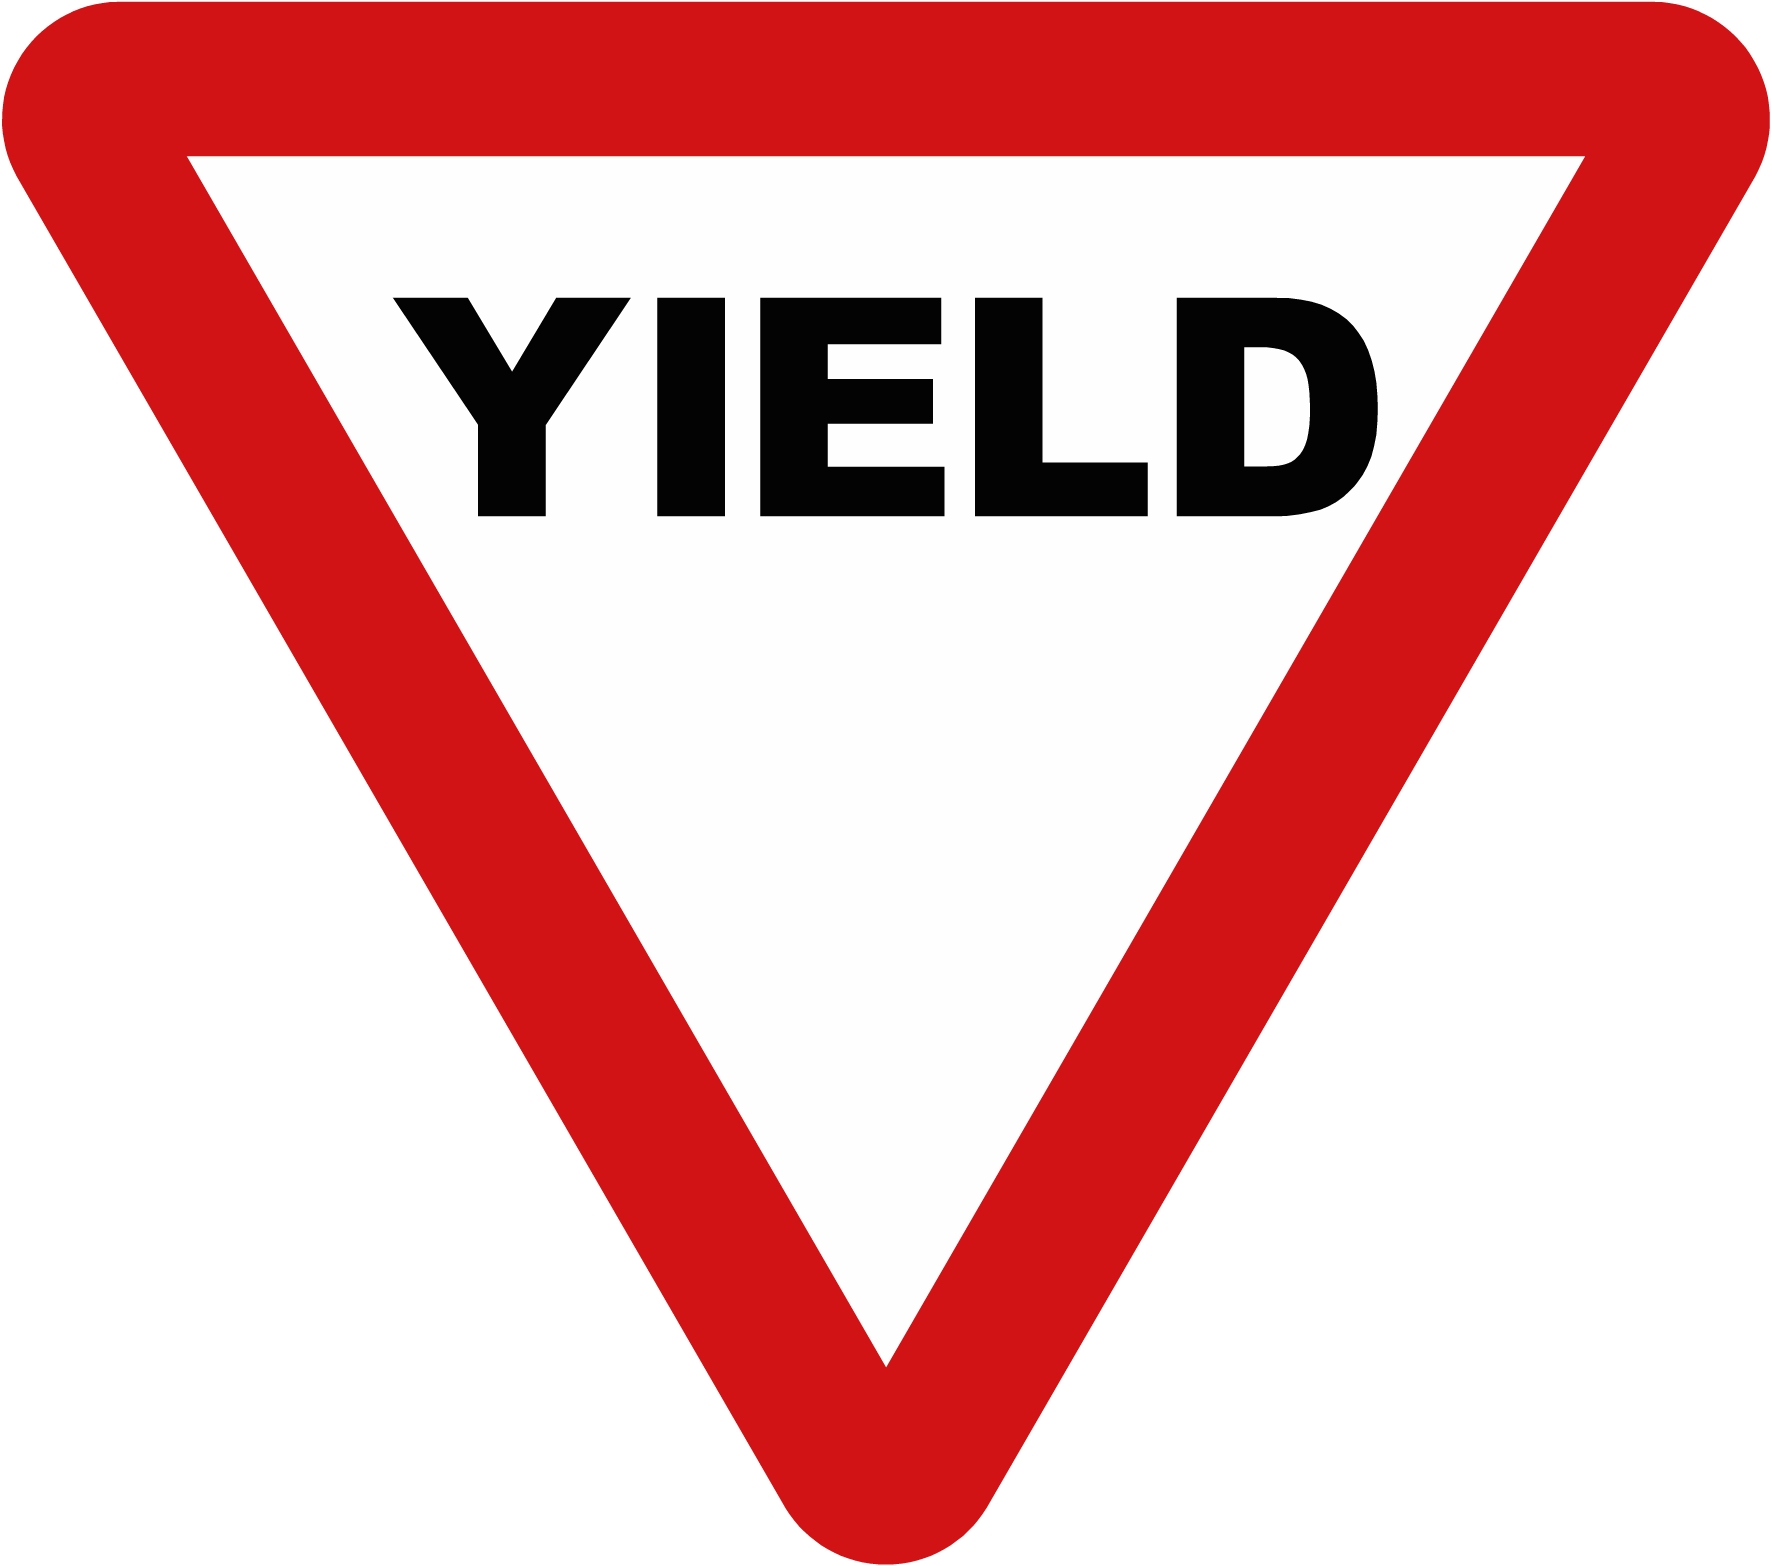 Yellow Yield Sign Clipart.